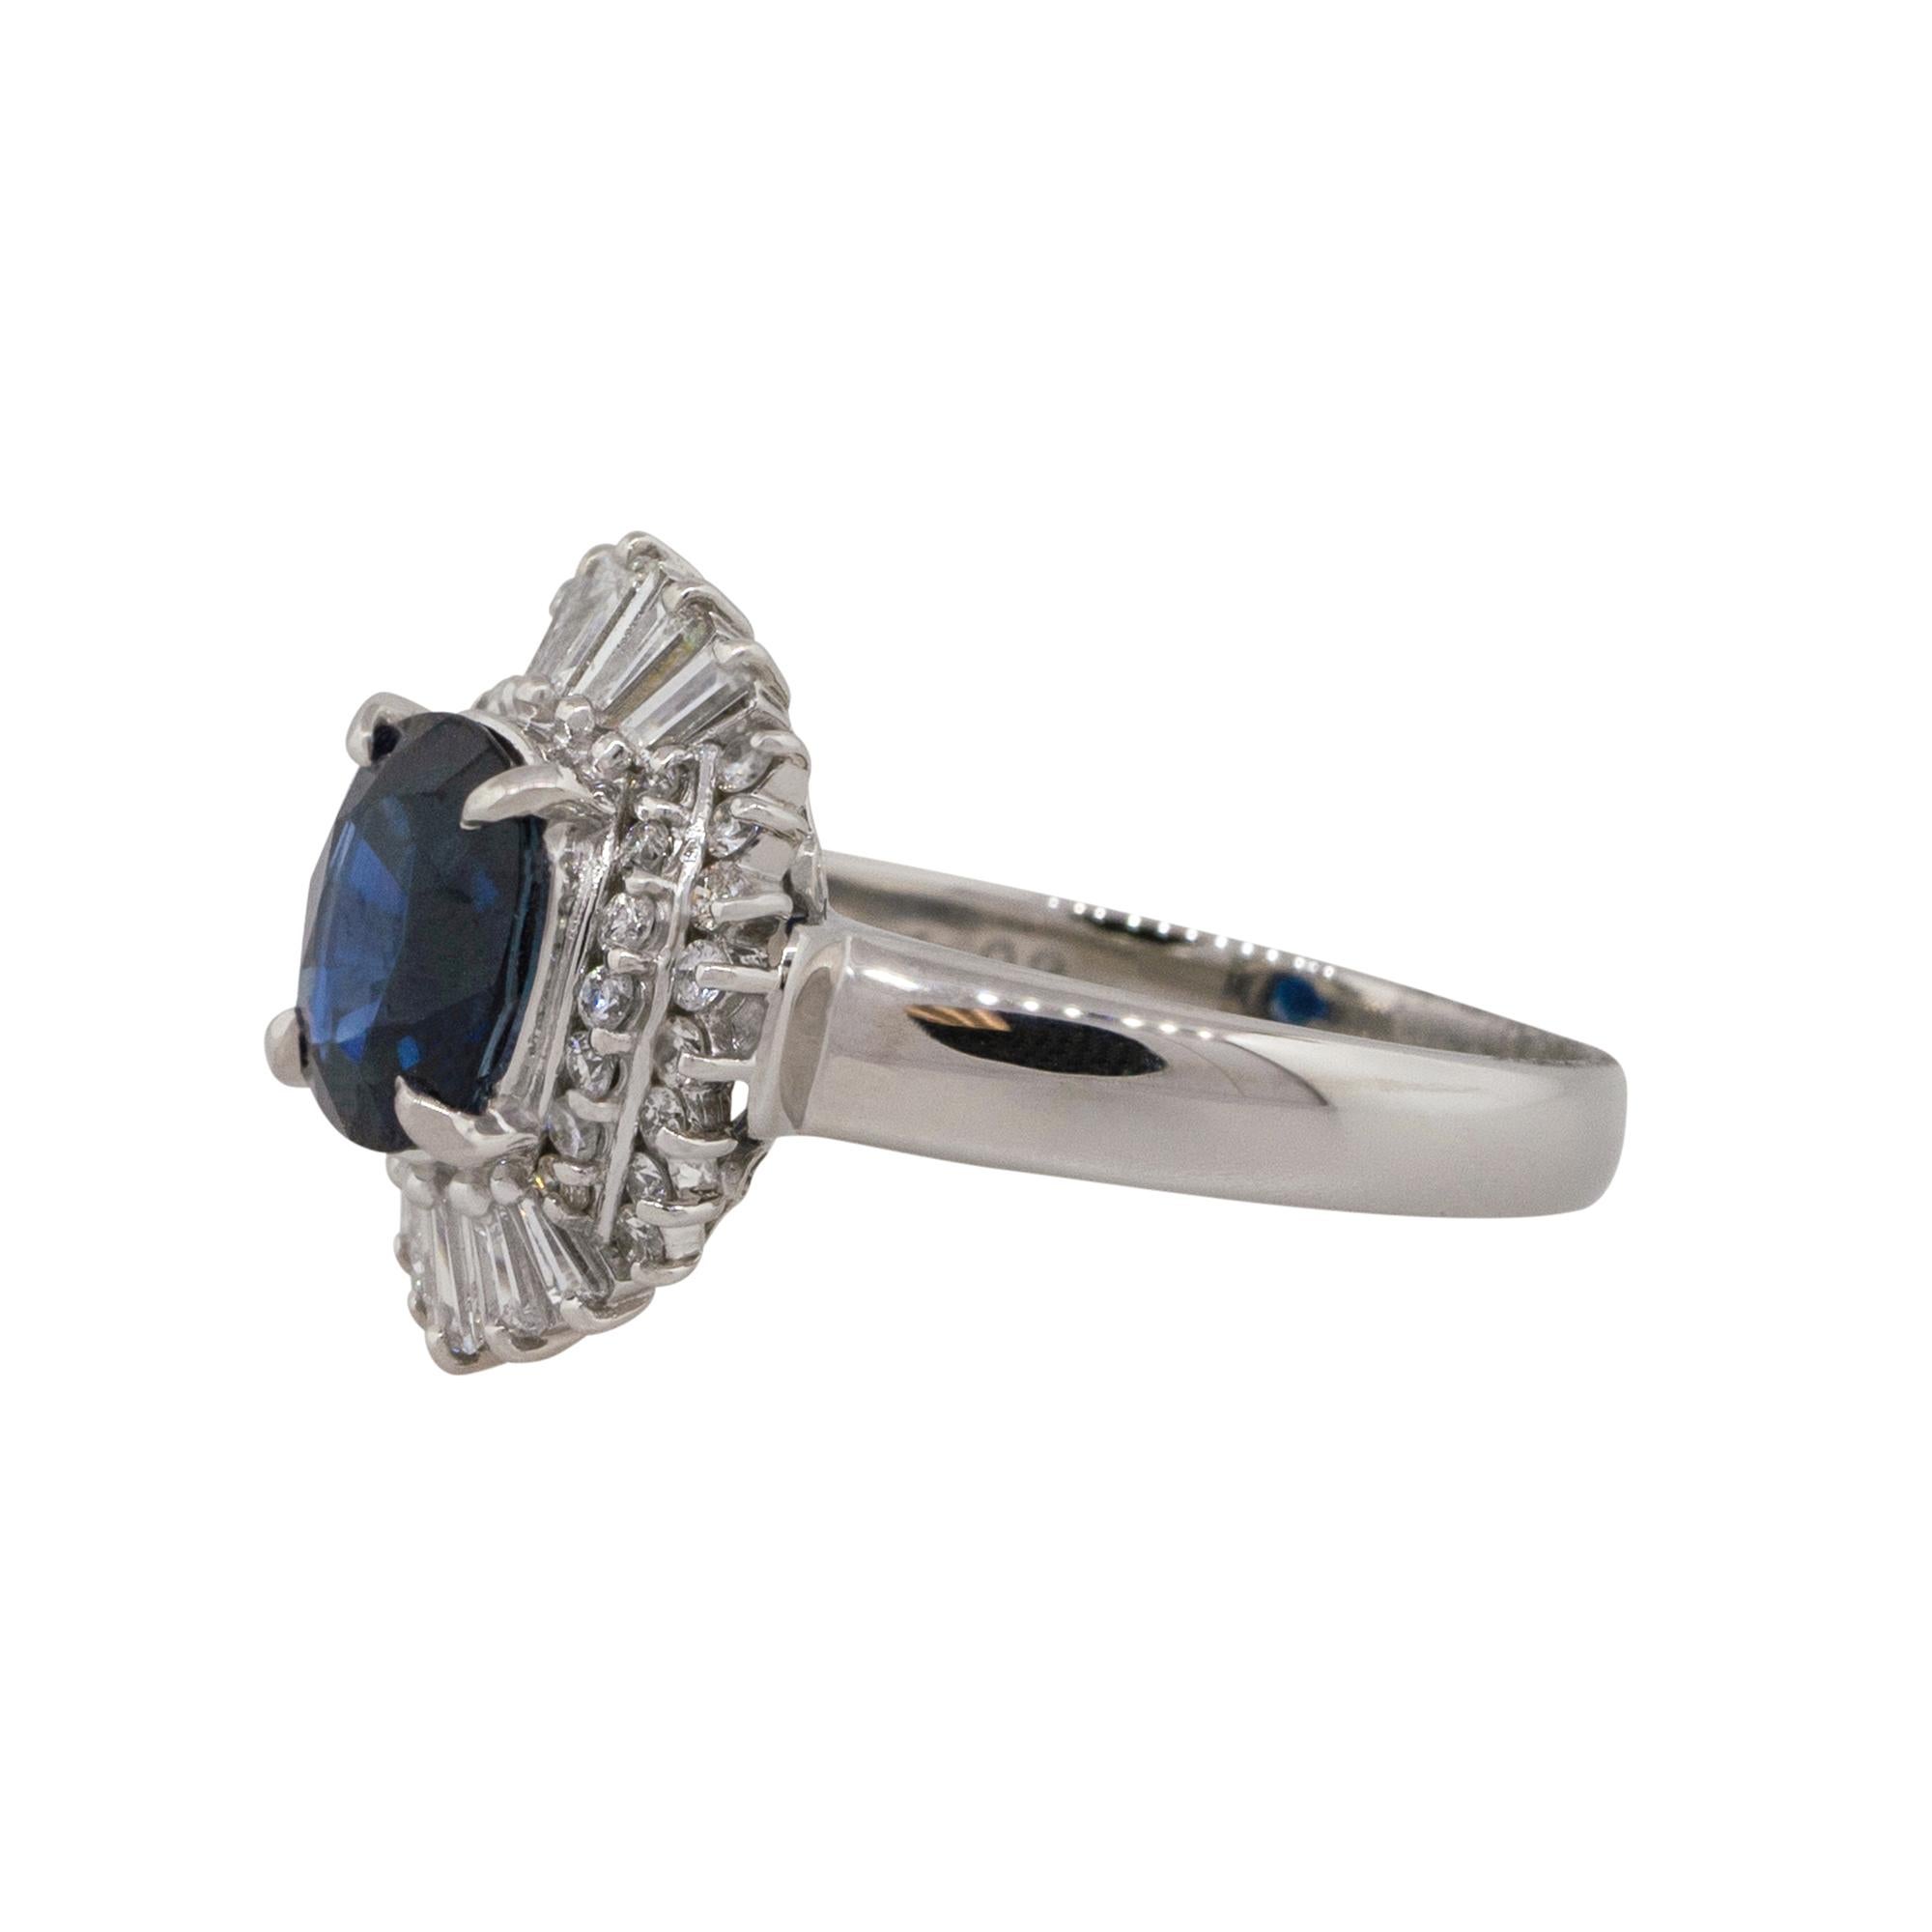 Material: Platinum
Gemstone details: Approx. 1.98ctw oval shaped Sapphire center gemstone
Diamond details: Approx. 0.60ctw of round and baguette cut Diamonds. Diamonds are G/H in color and VS in clarity
Ring Size: 6.75 
Ring Measurements: 0.75